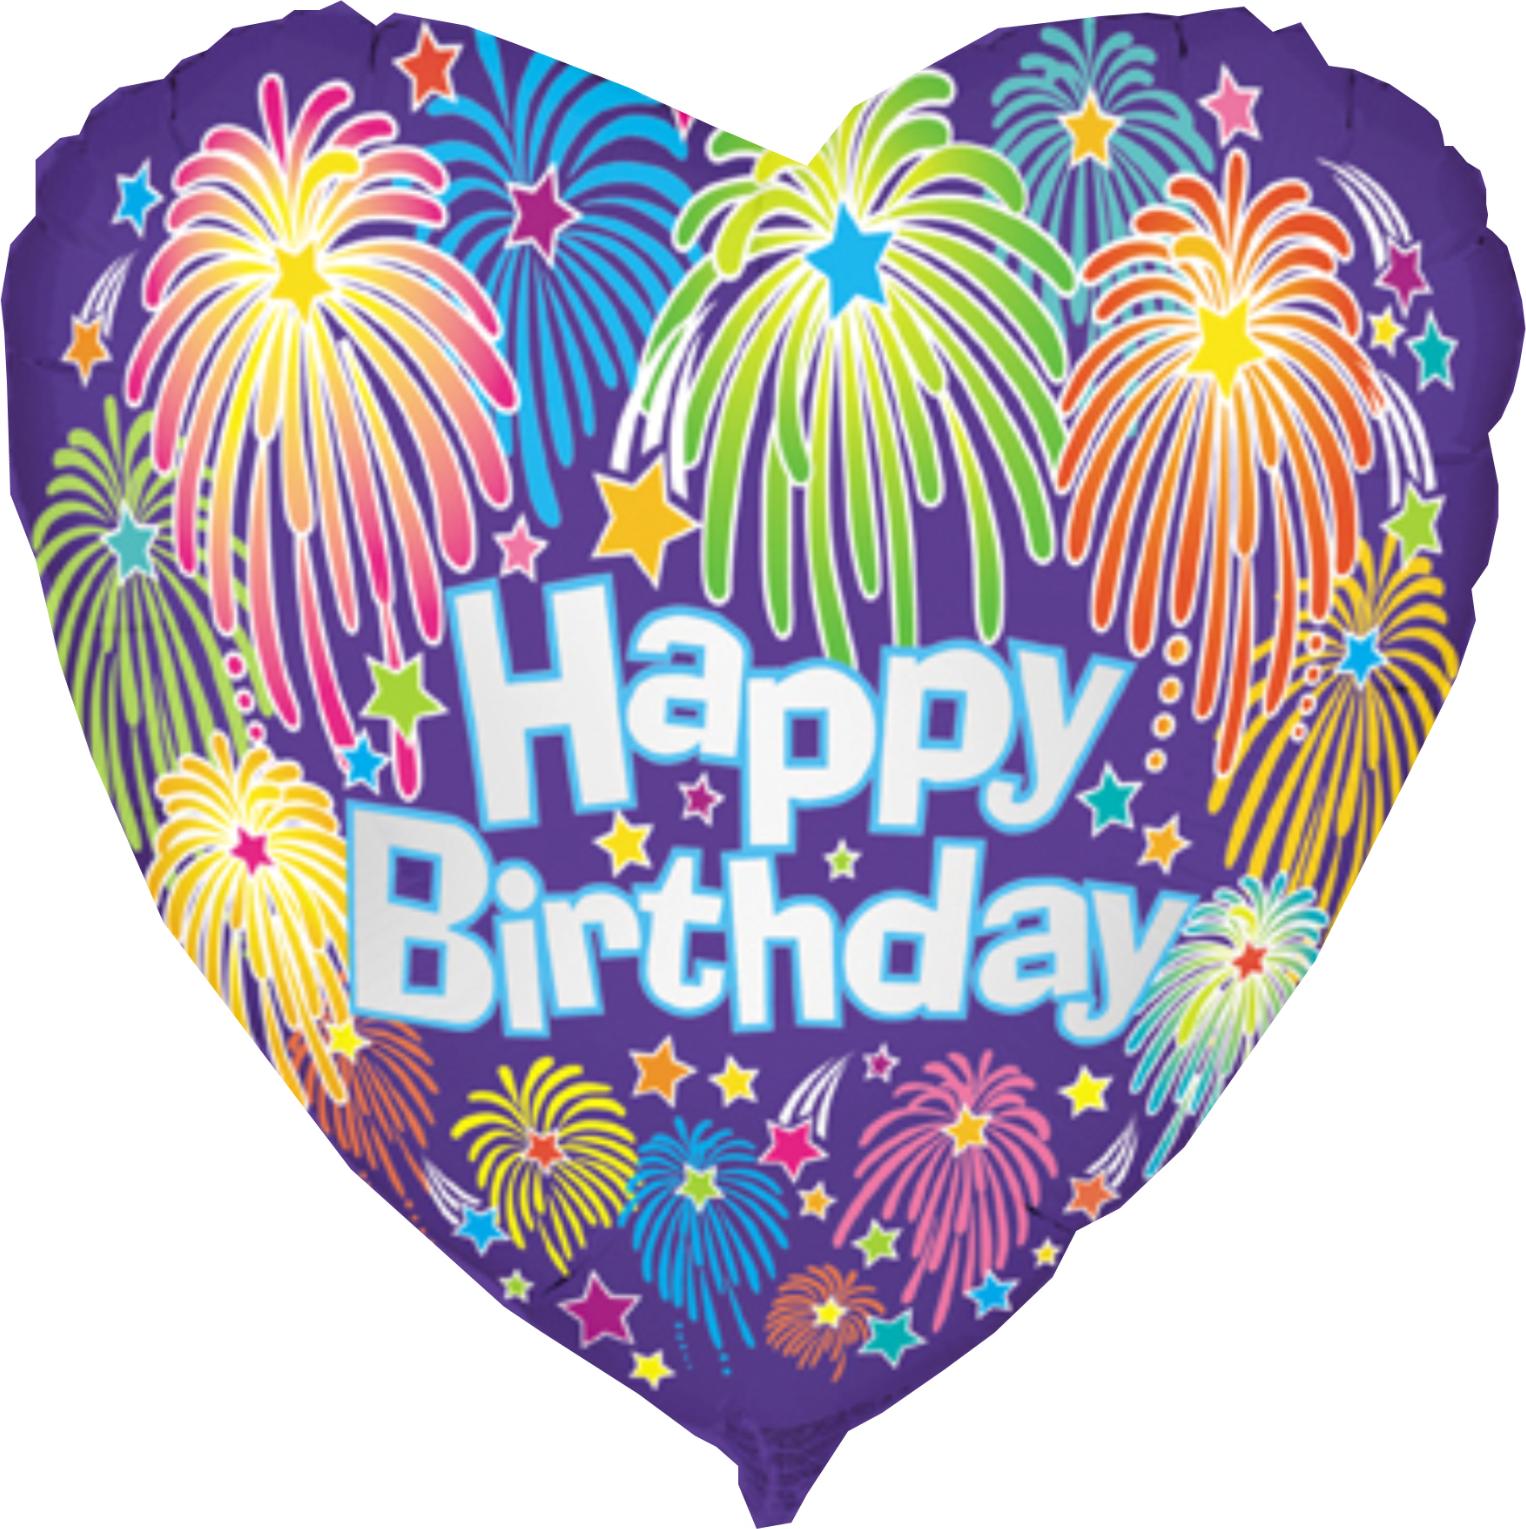 Happy Birthday Brilliant Balloons Party Supplies including Paper ...